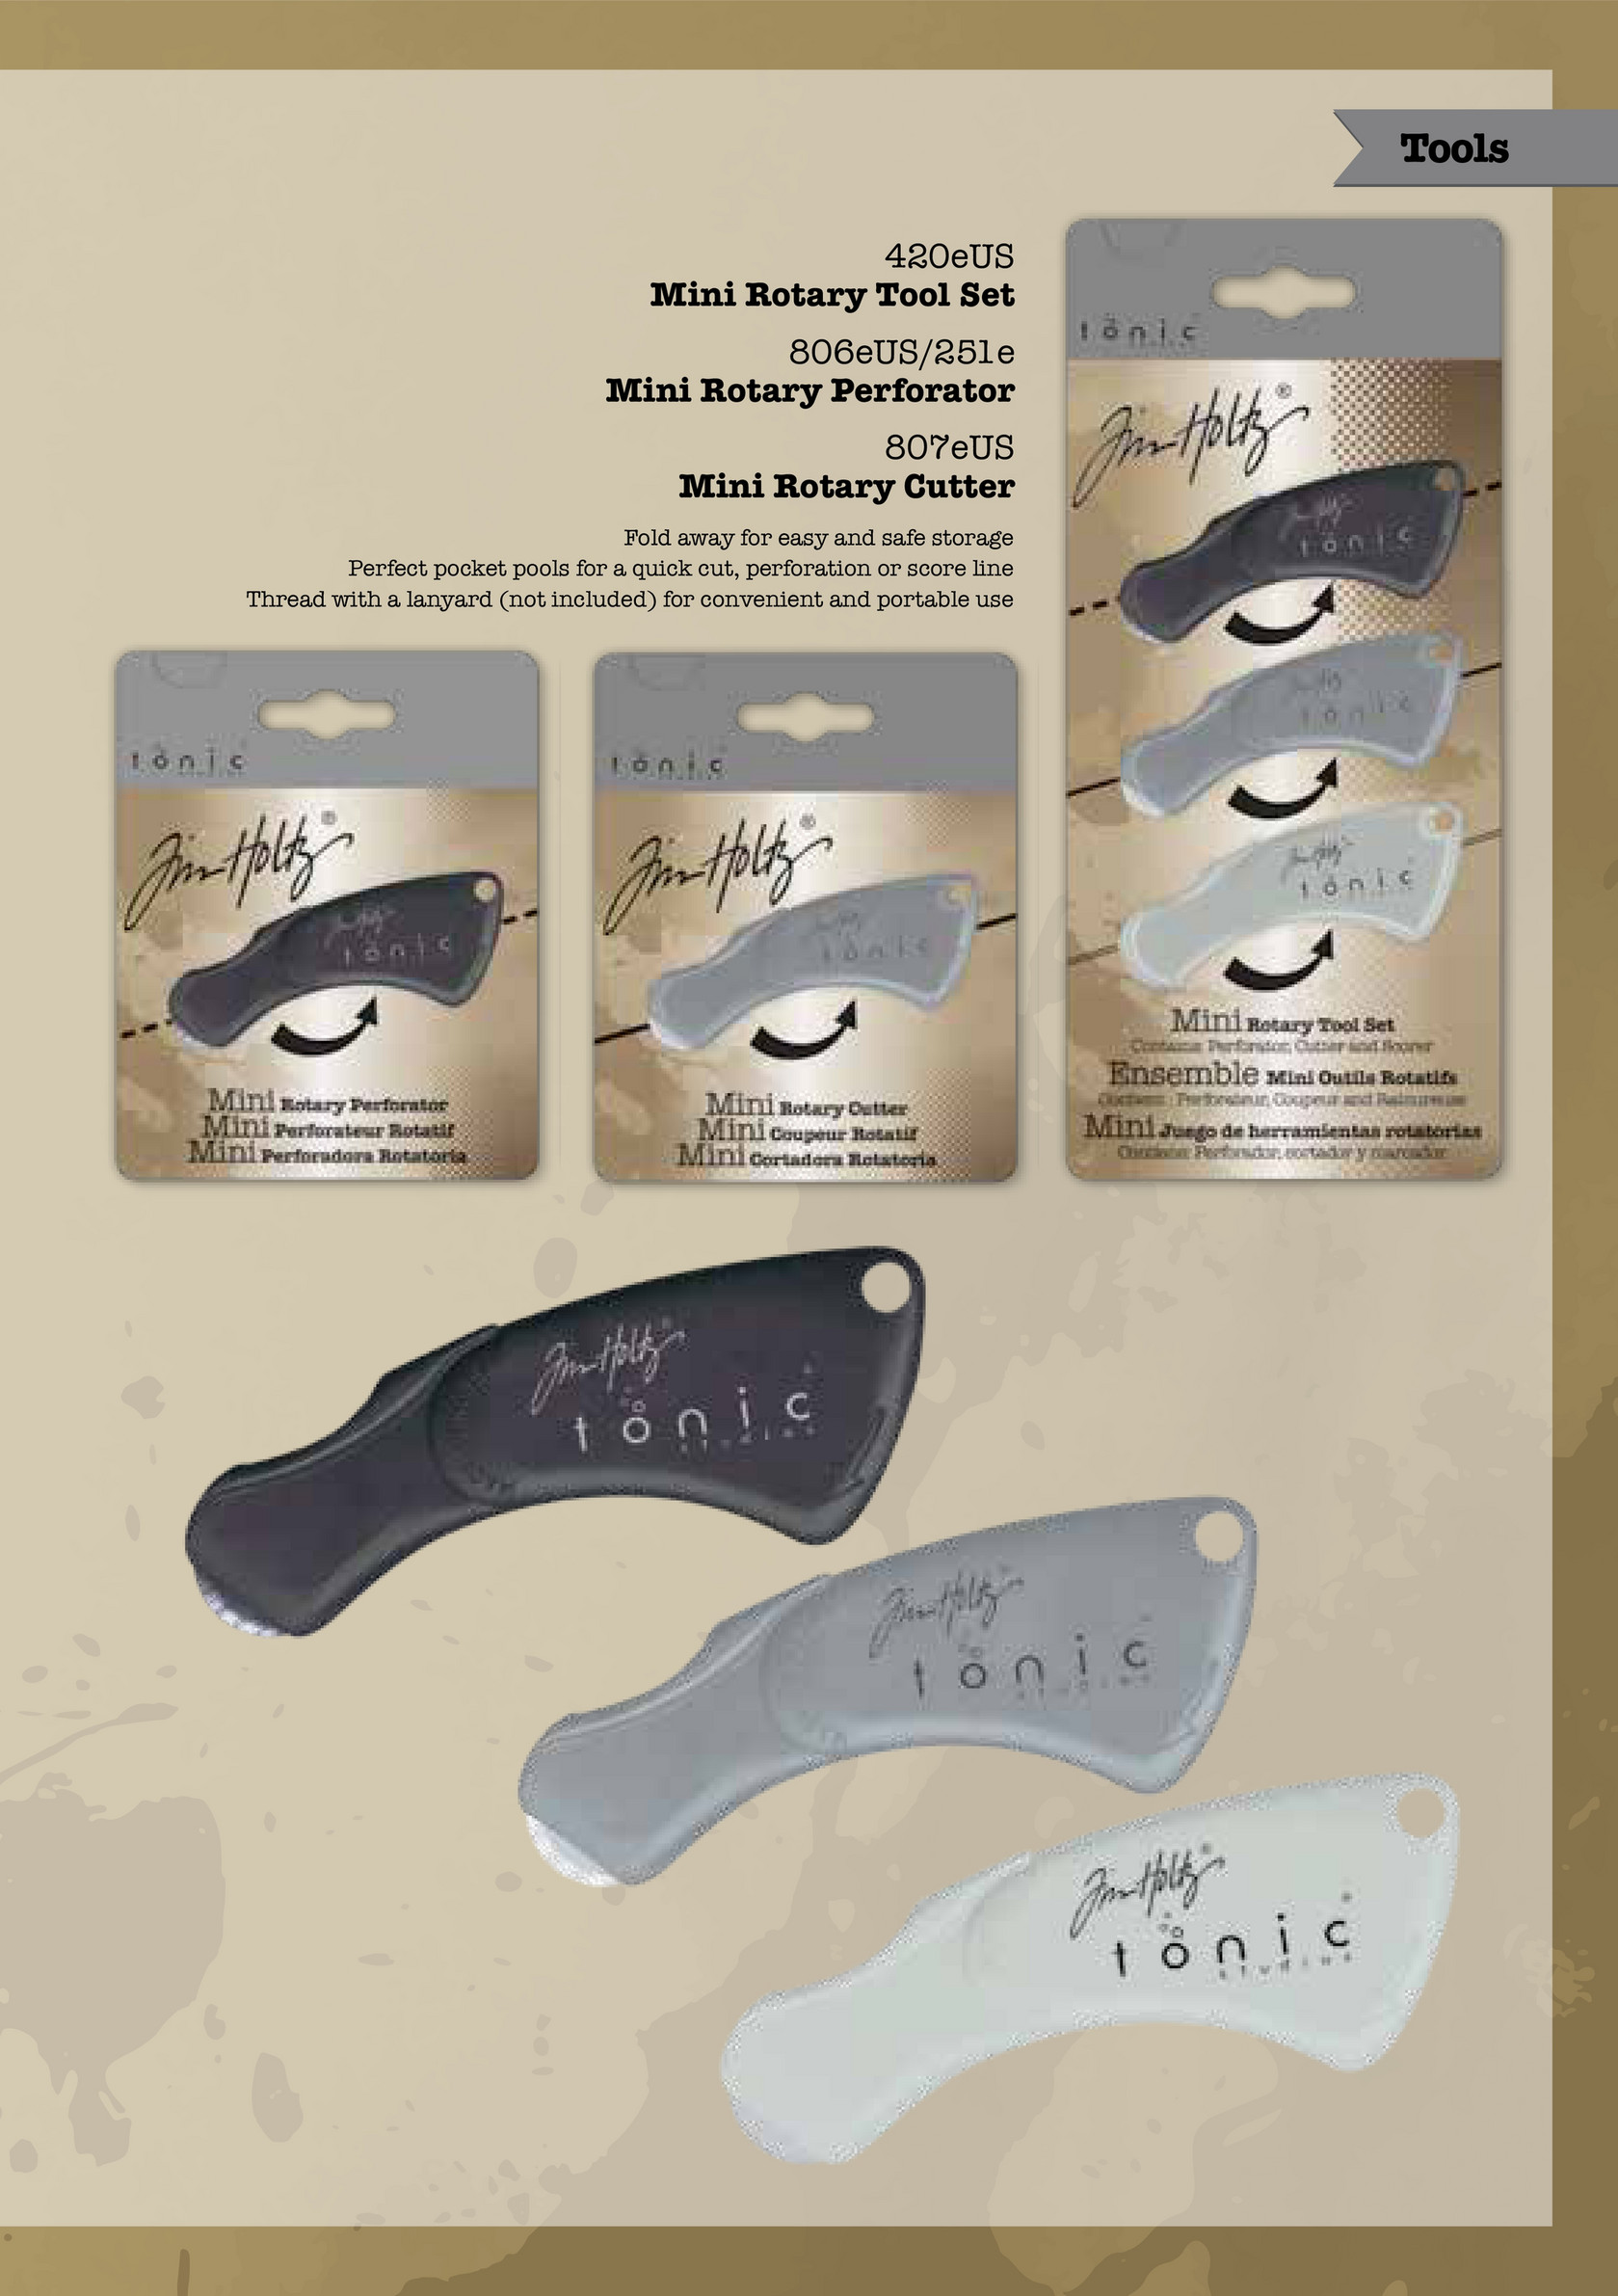 Tonic Studios Ltd - Tim Holtz New Product Guide - Page 8-9